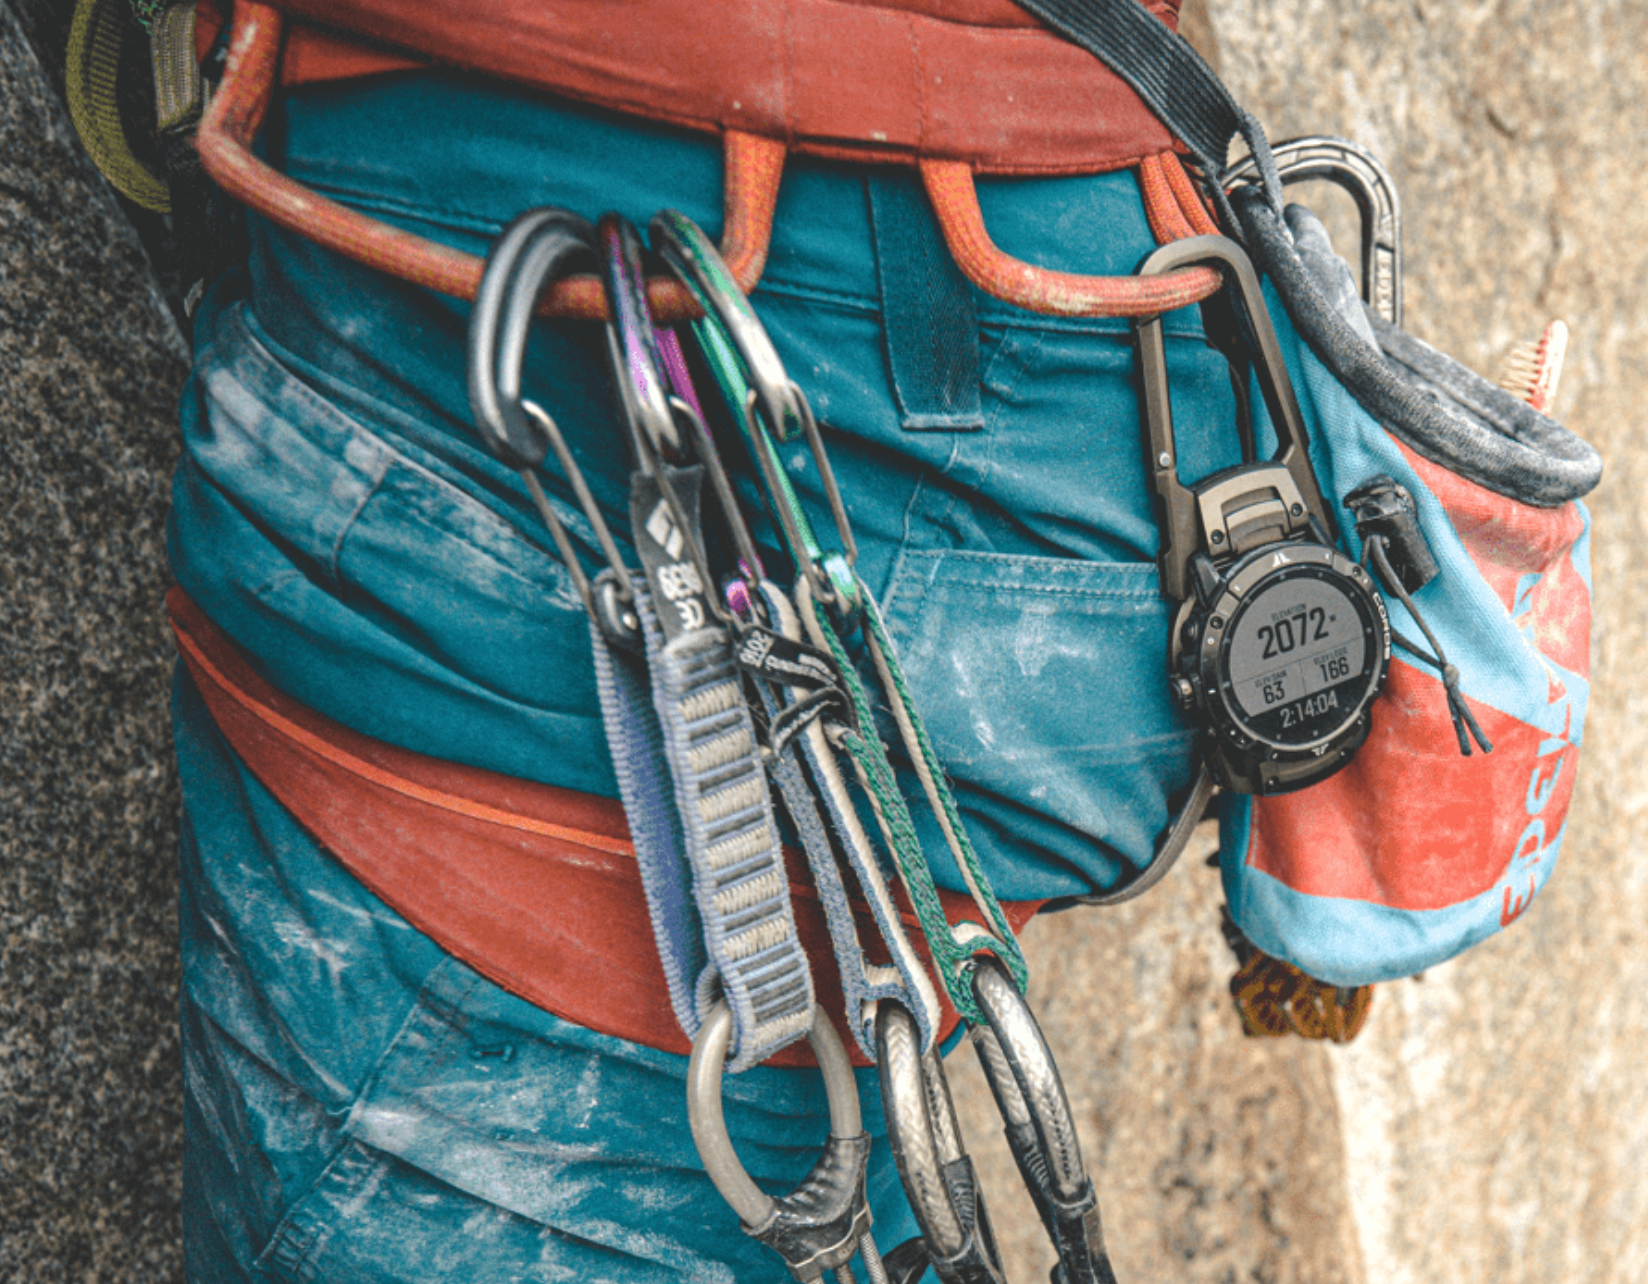 Seiko] From dressed up to 'mountain' climbing; the Alpinist : r/Watches